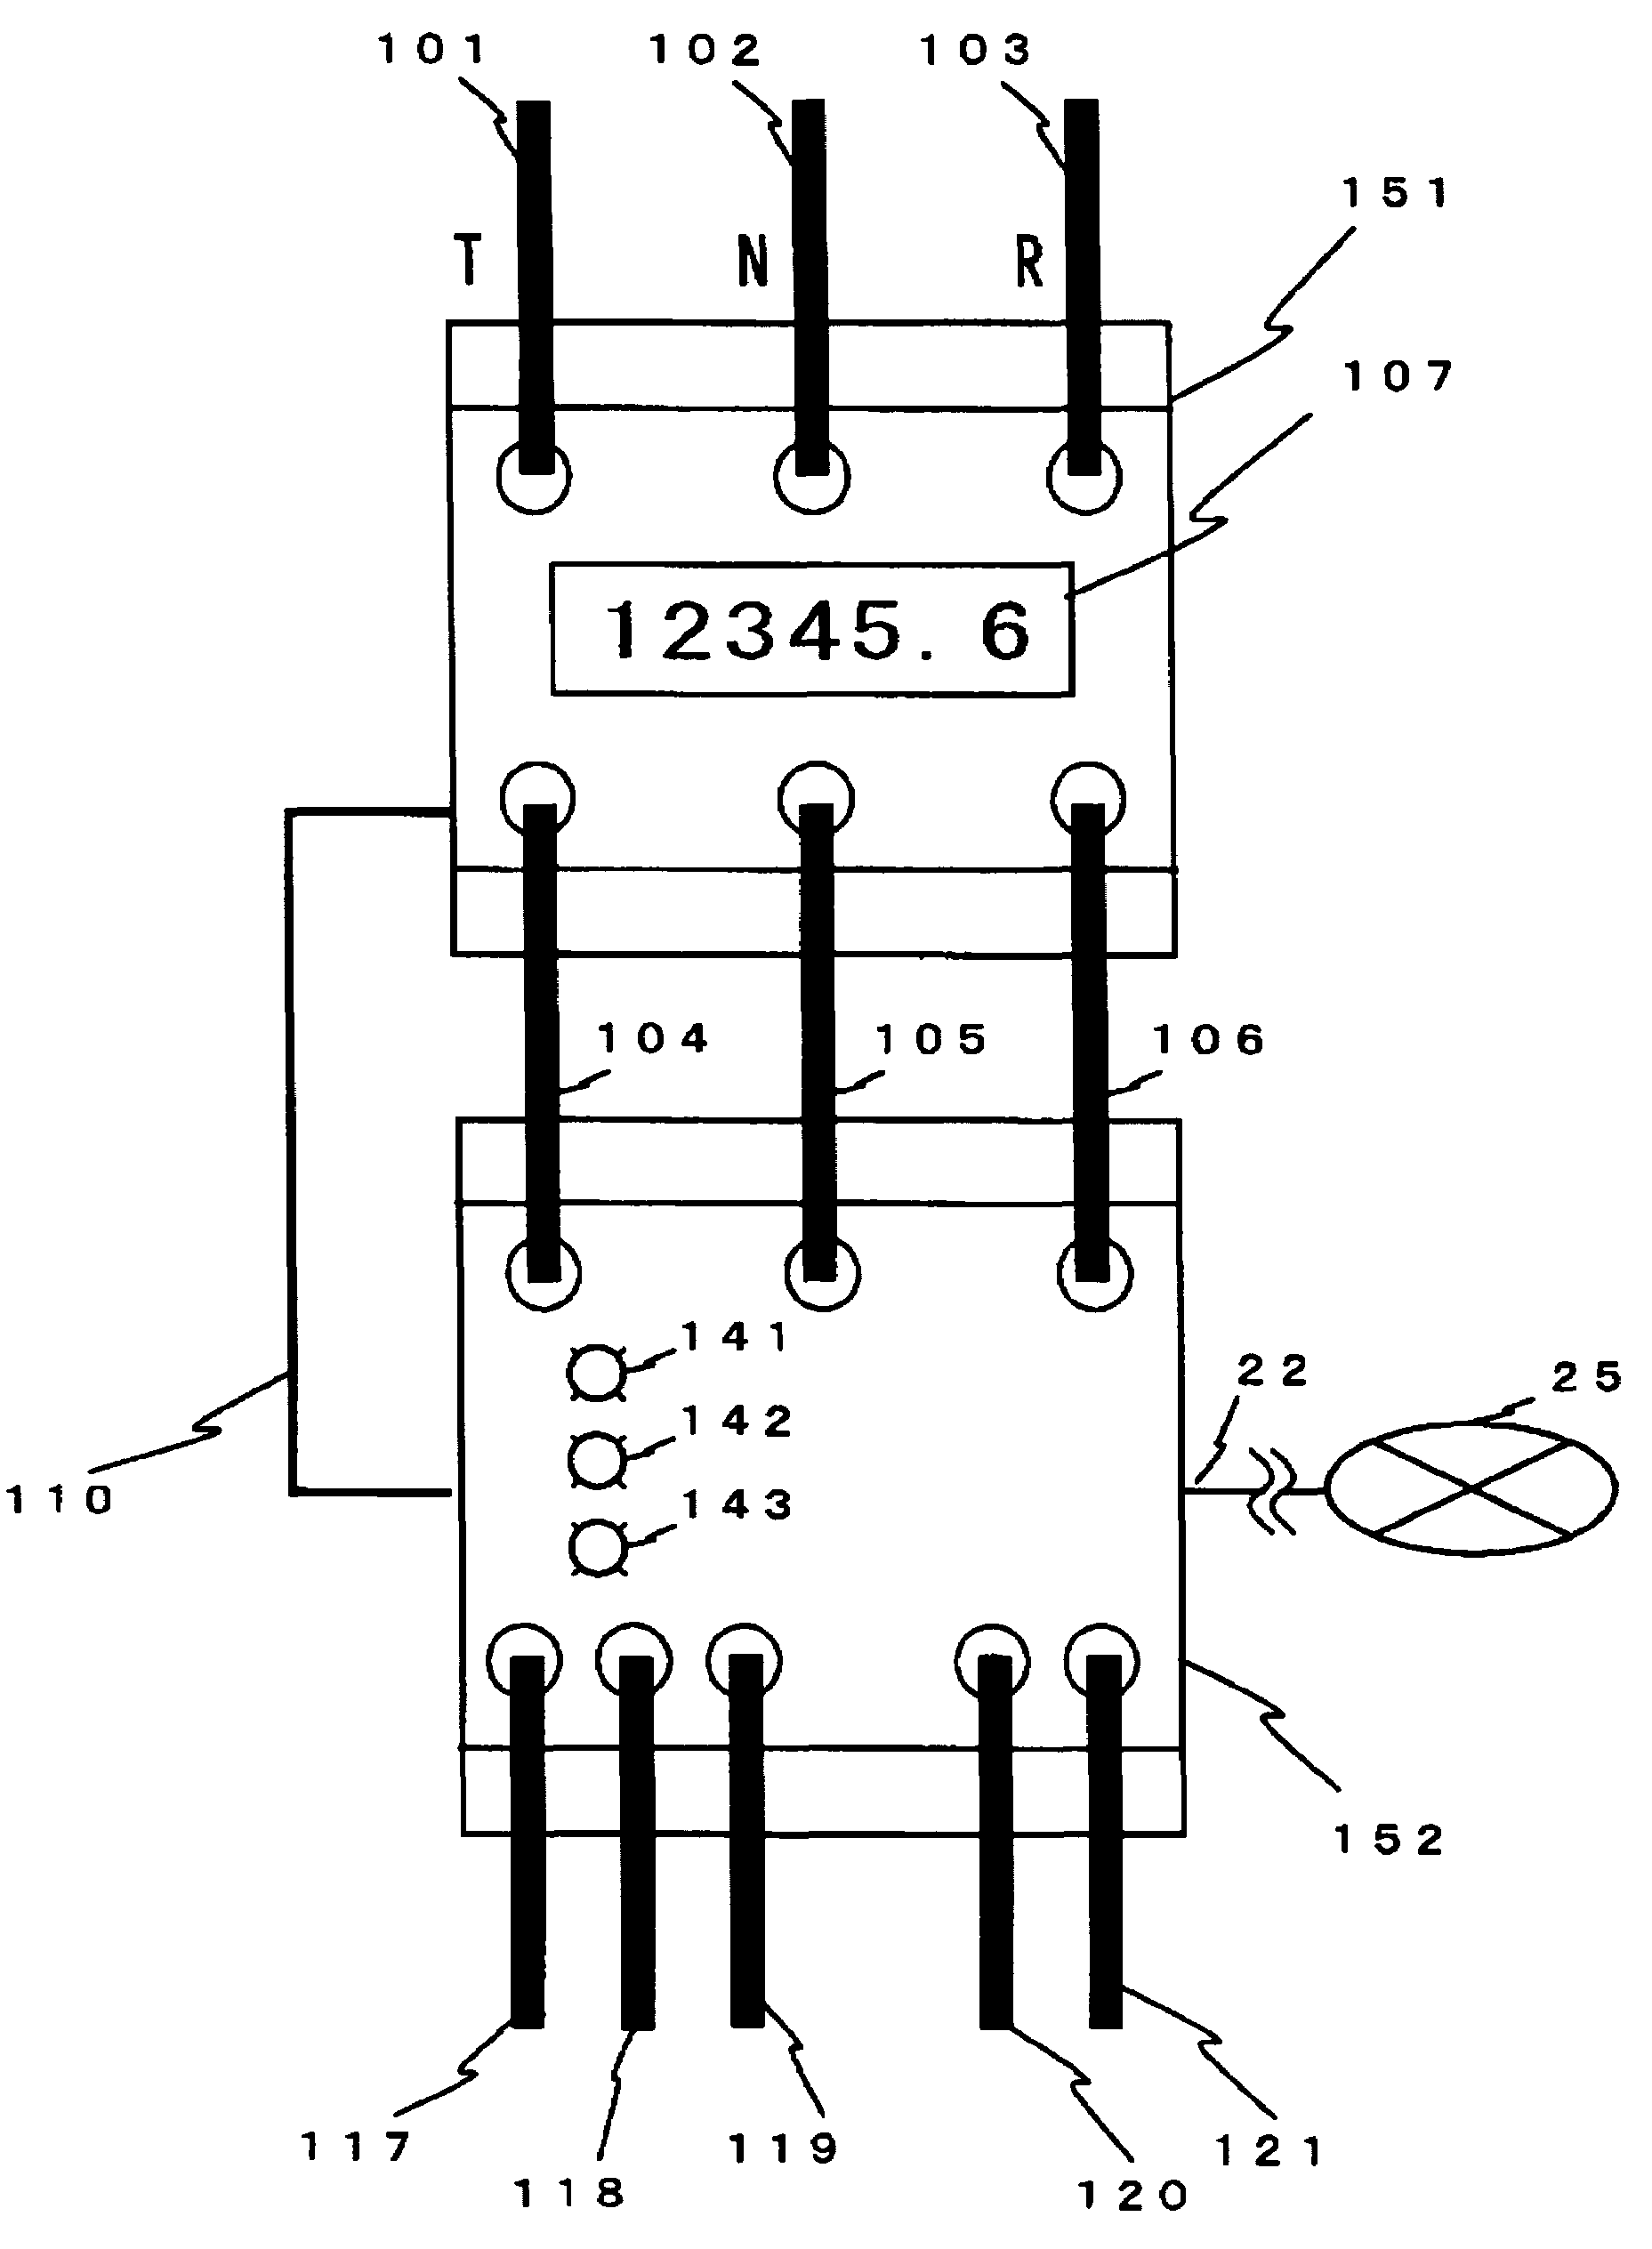 Power consumption measuring device and power control system